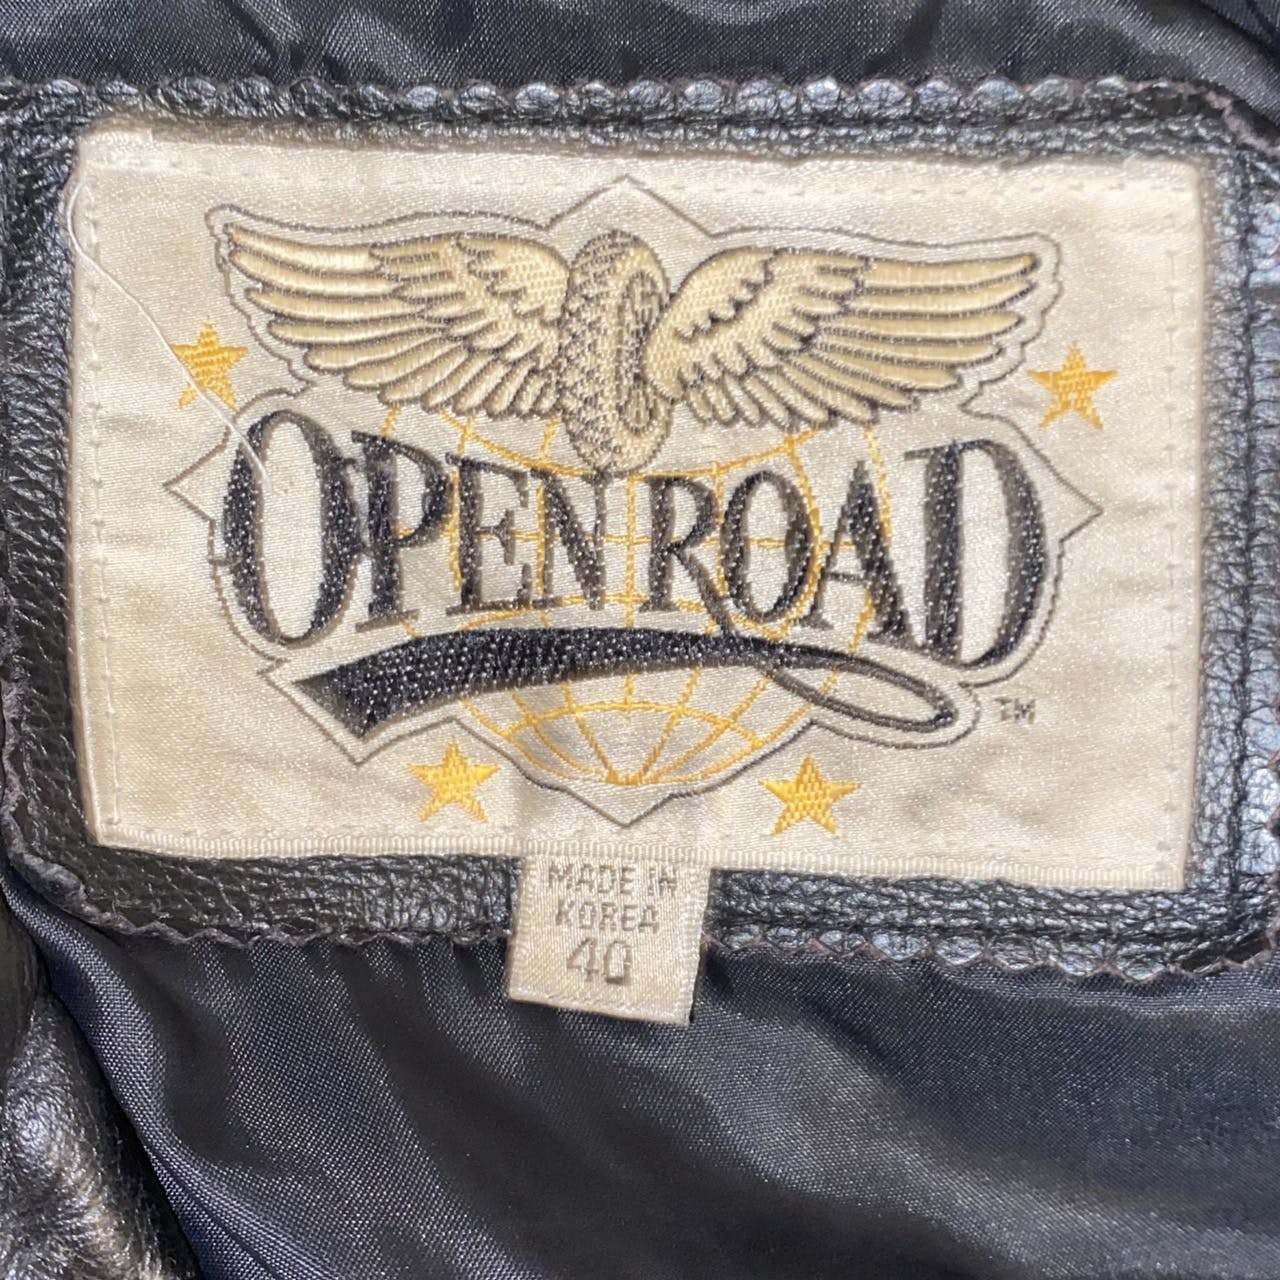 Vintage Fringed Leather Belted Motorcycle Jacket by Open Road | Shop ...